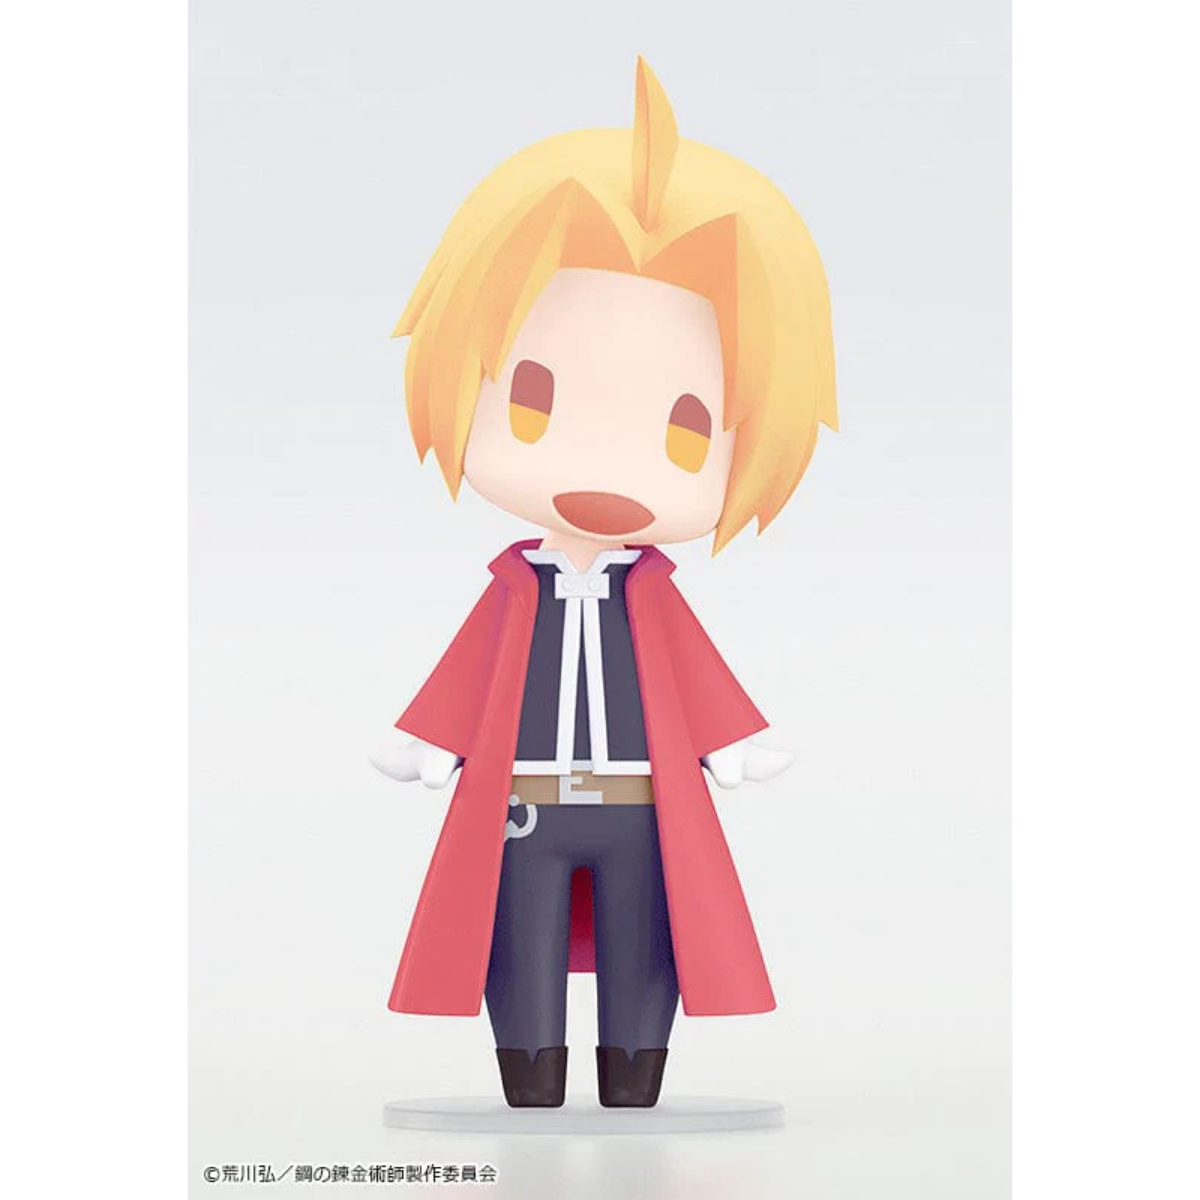 HELLO! Good Smile Full Metal Alchemist: Brotherhood "Edward Elric"-Good Smile Company-Ace Cards & Collectibles